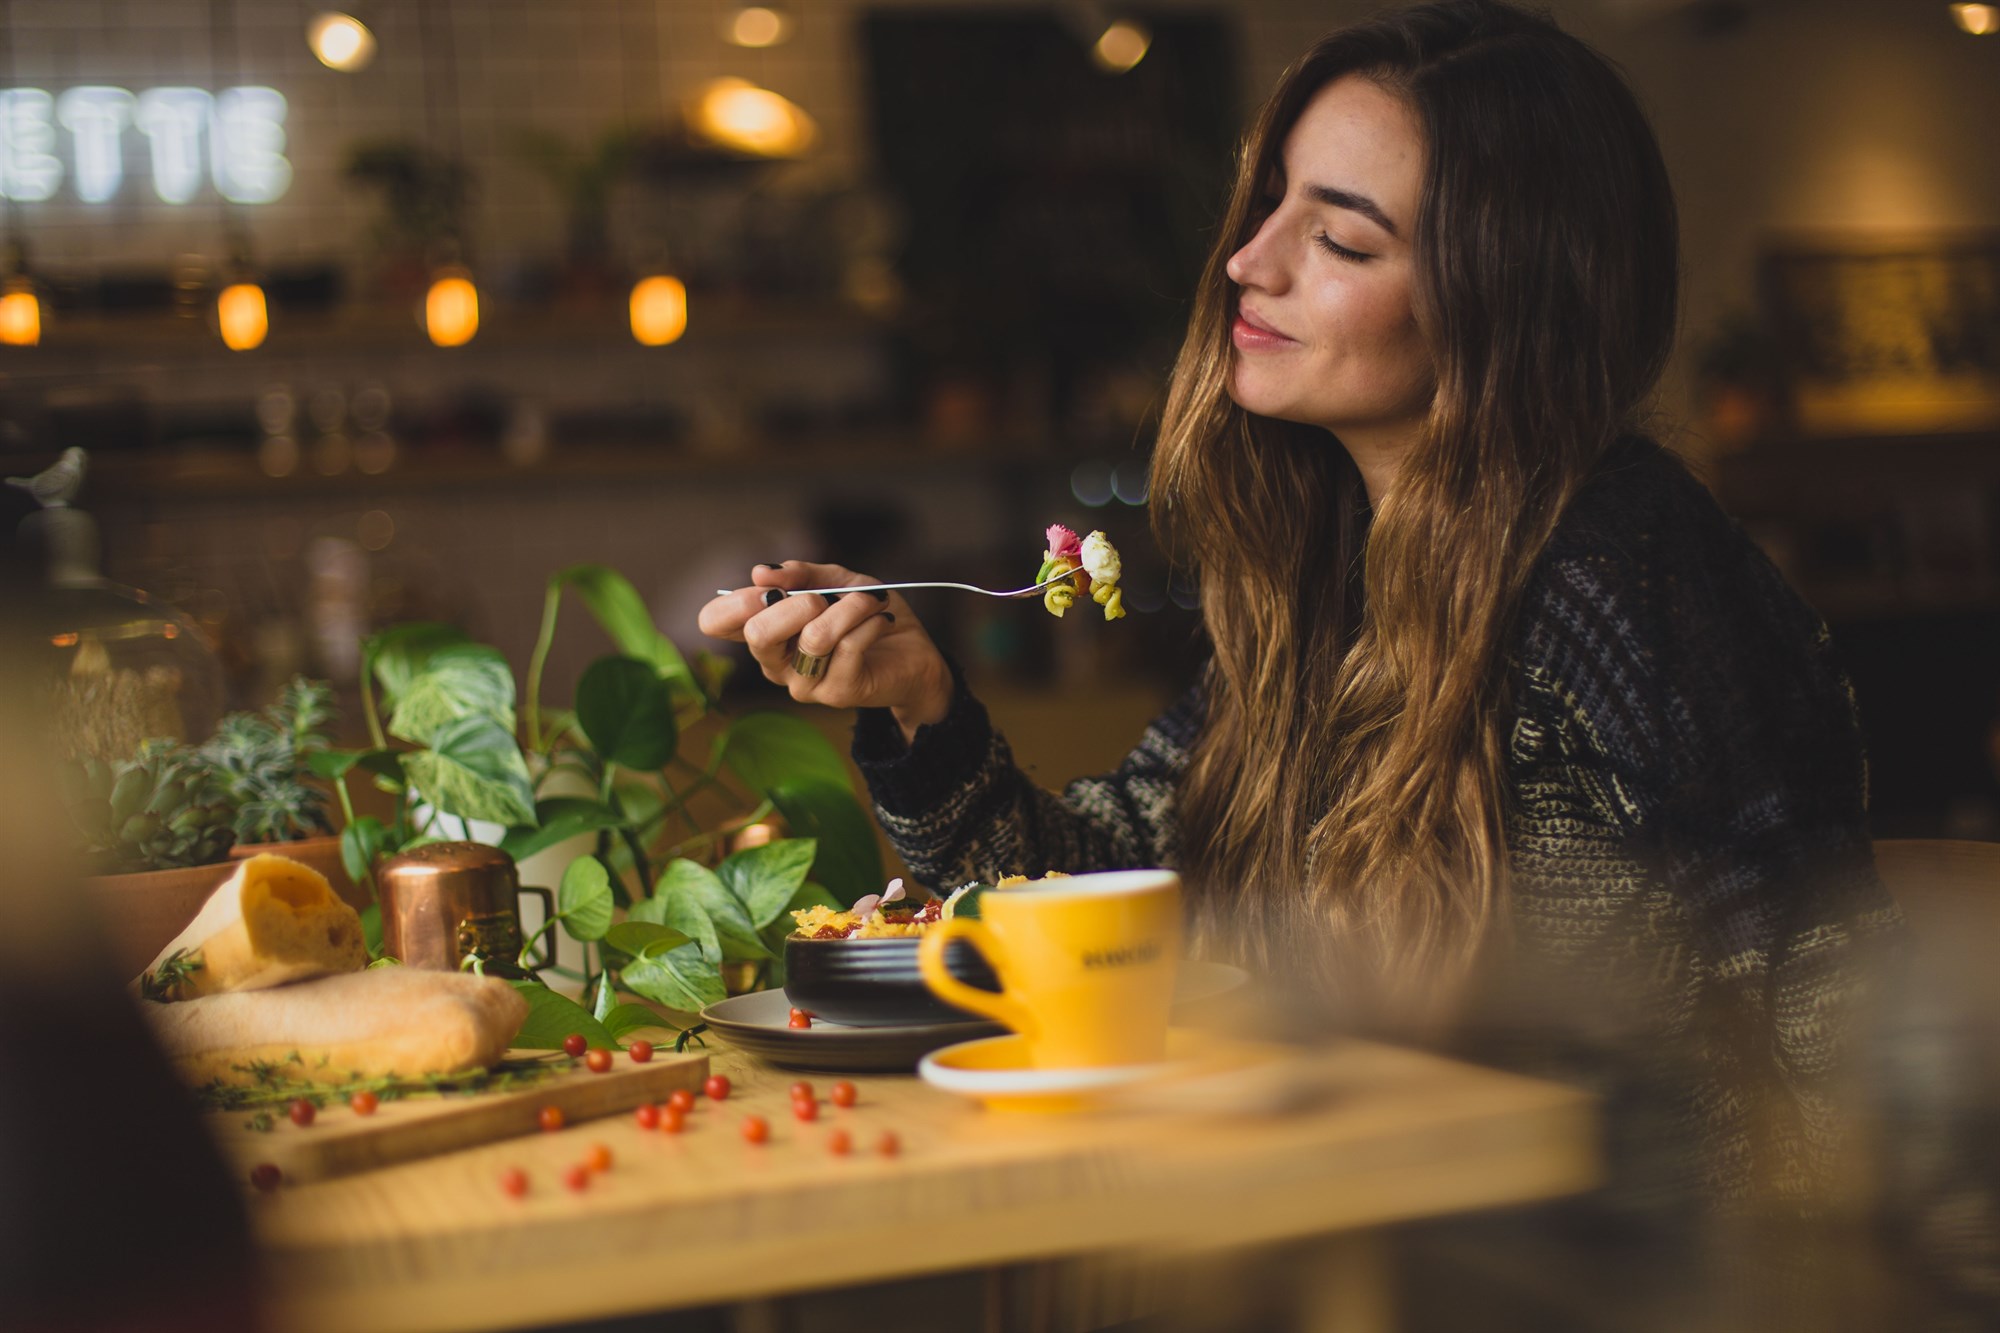 Woman enjoying a salad in a nicely lit restaurant